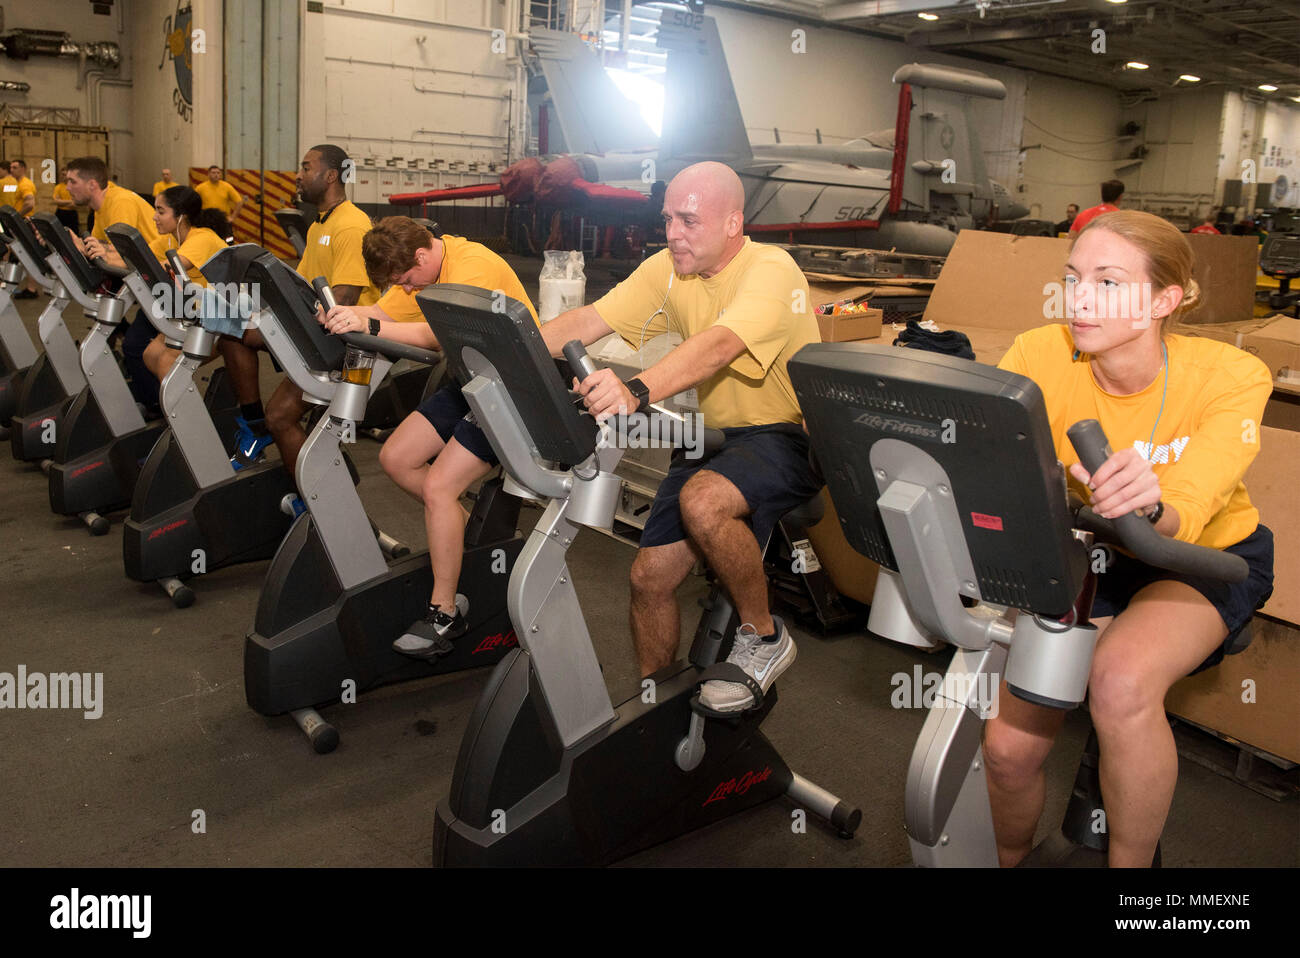 https://c8.alamy.com/comp/MMEXNE/171030-n-yn937-060-atlantic-ocean-oct-30-2017-sailors-ride-stationary-bikes-while-participating-in-the-physical-readiness-test-prt-in-the-hanger-bay-aboard-the-aircraft-carrier-uss-harry-s-truman-cvn-75-harry-s-truman-has-successfully-completed-tailored-shipboard-test-availability-and-final-evaluation-problem-and-is-underway-preparing-for-future-operations-us-navy-photo-by-mass-communication-specialist-3rd-class-alan-lewisreleased-MMEXNE.jpg